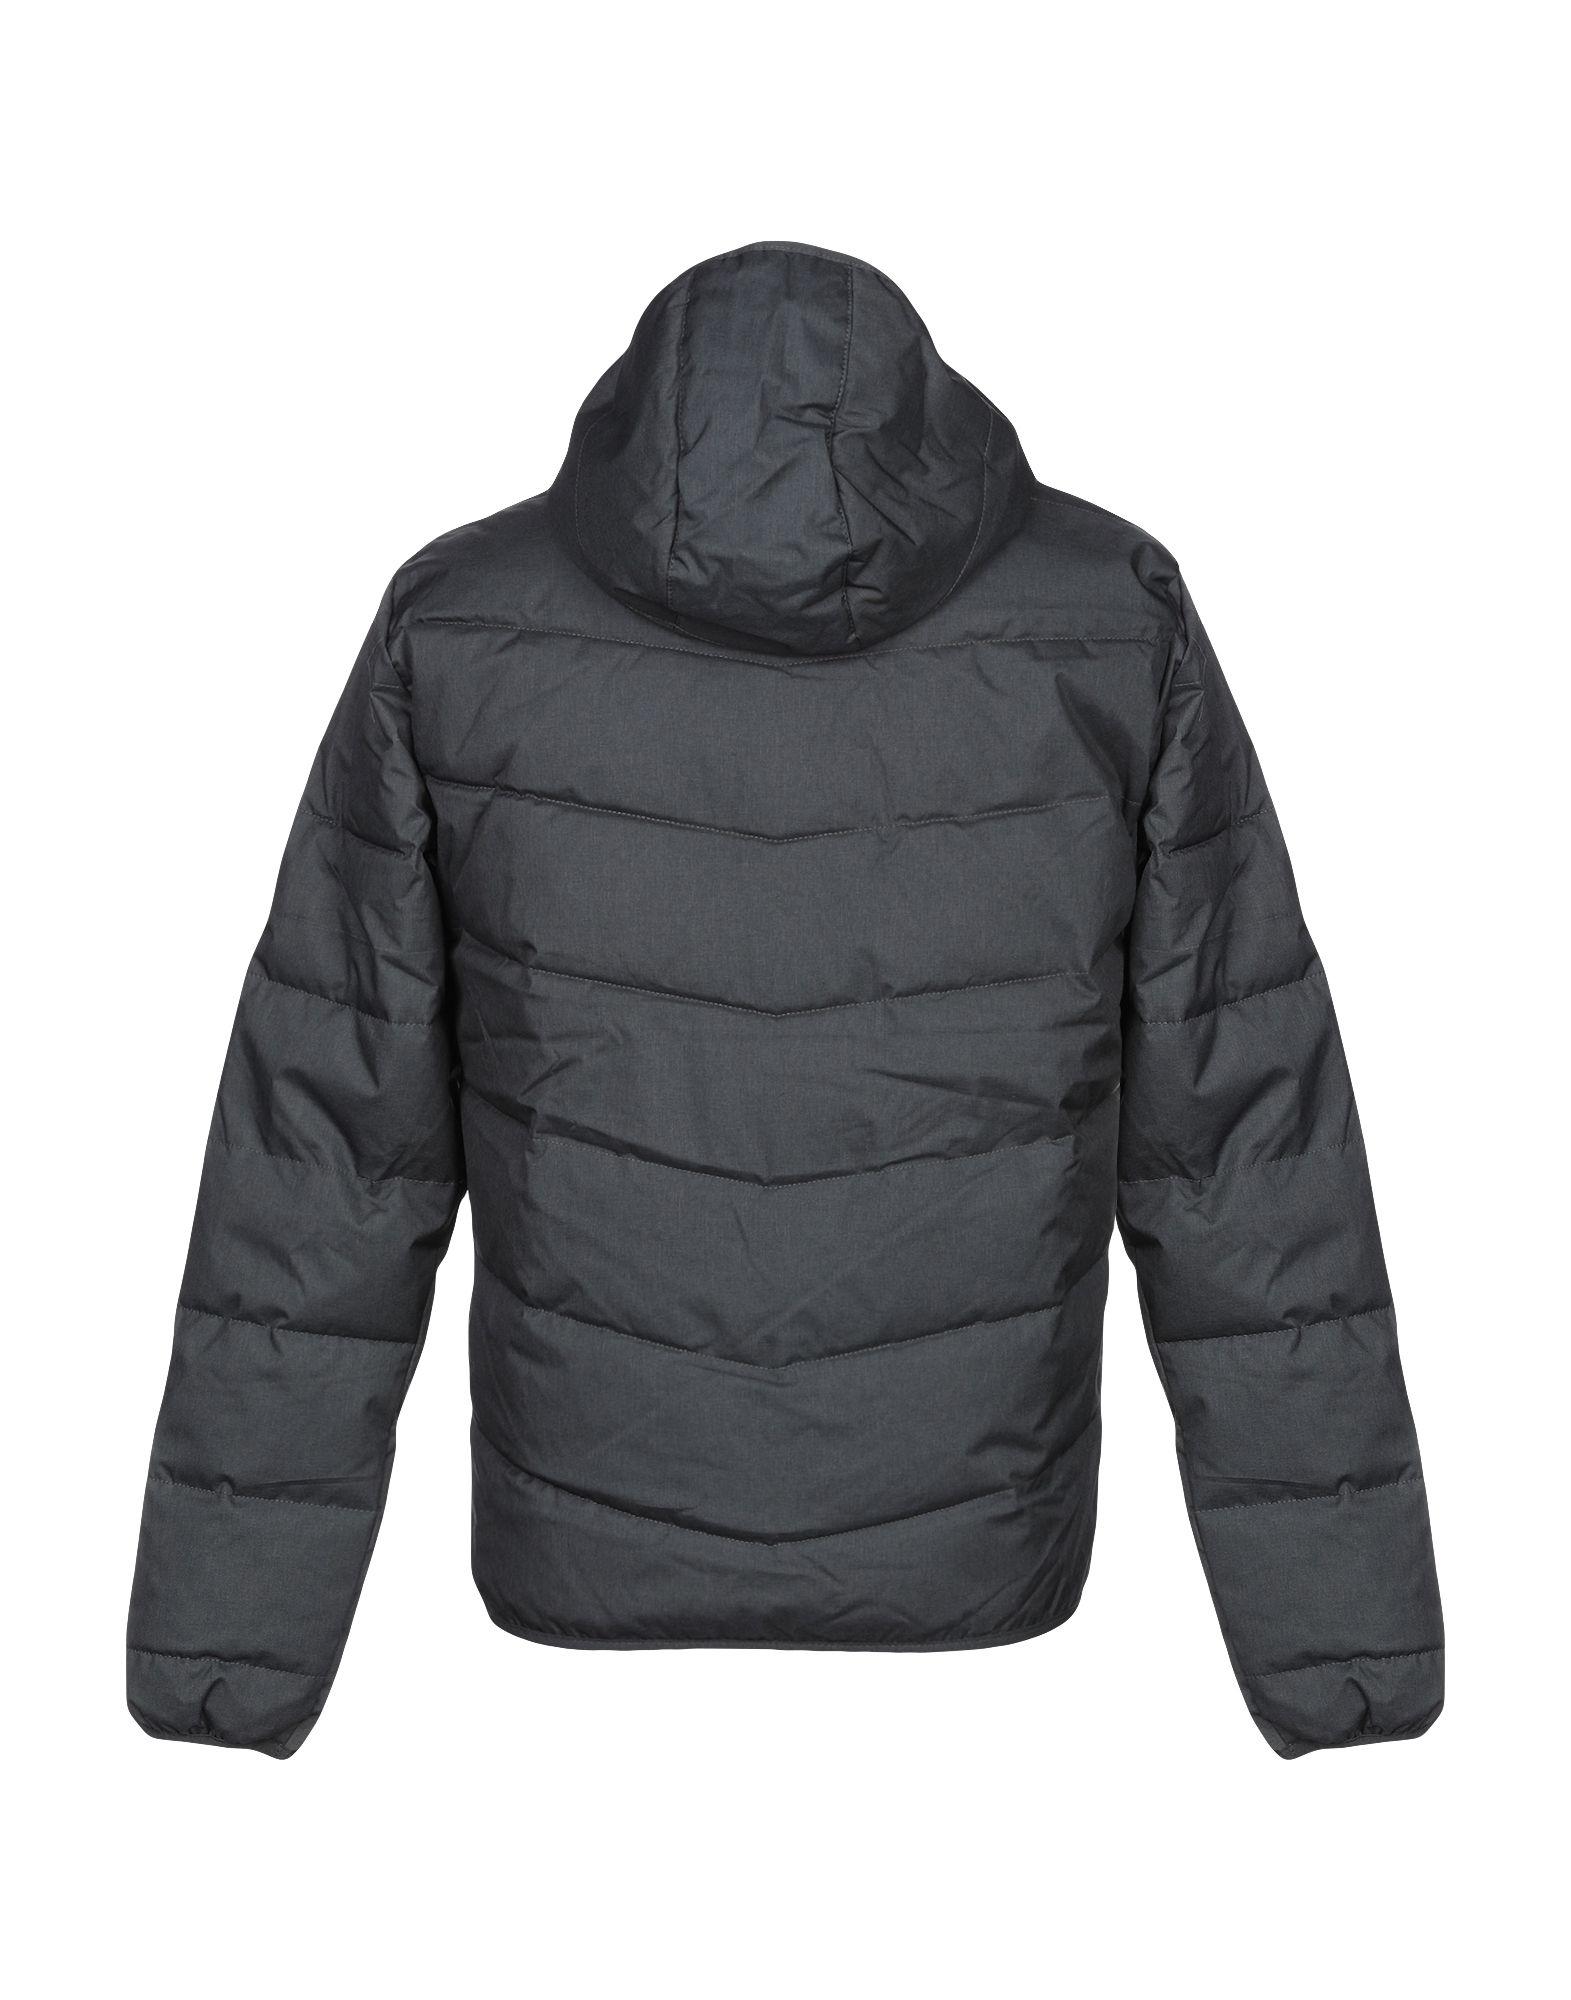 Solid Synthetic Down Jacket in Lead (Gray) for Men - Lyst